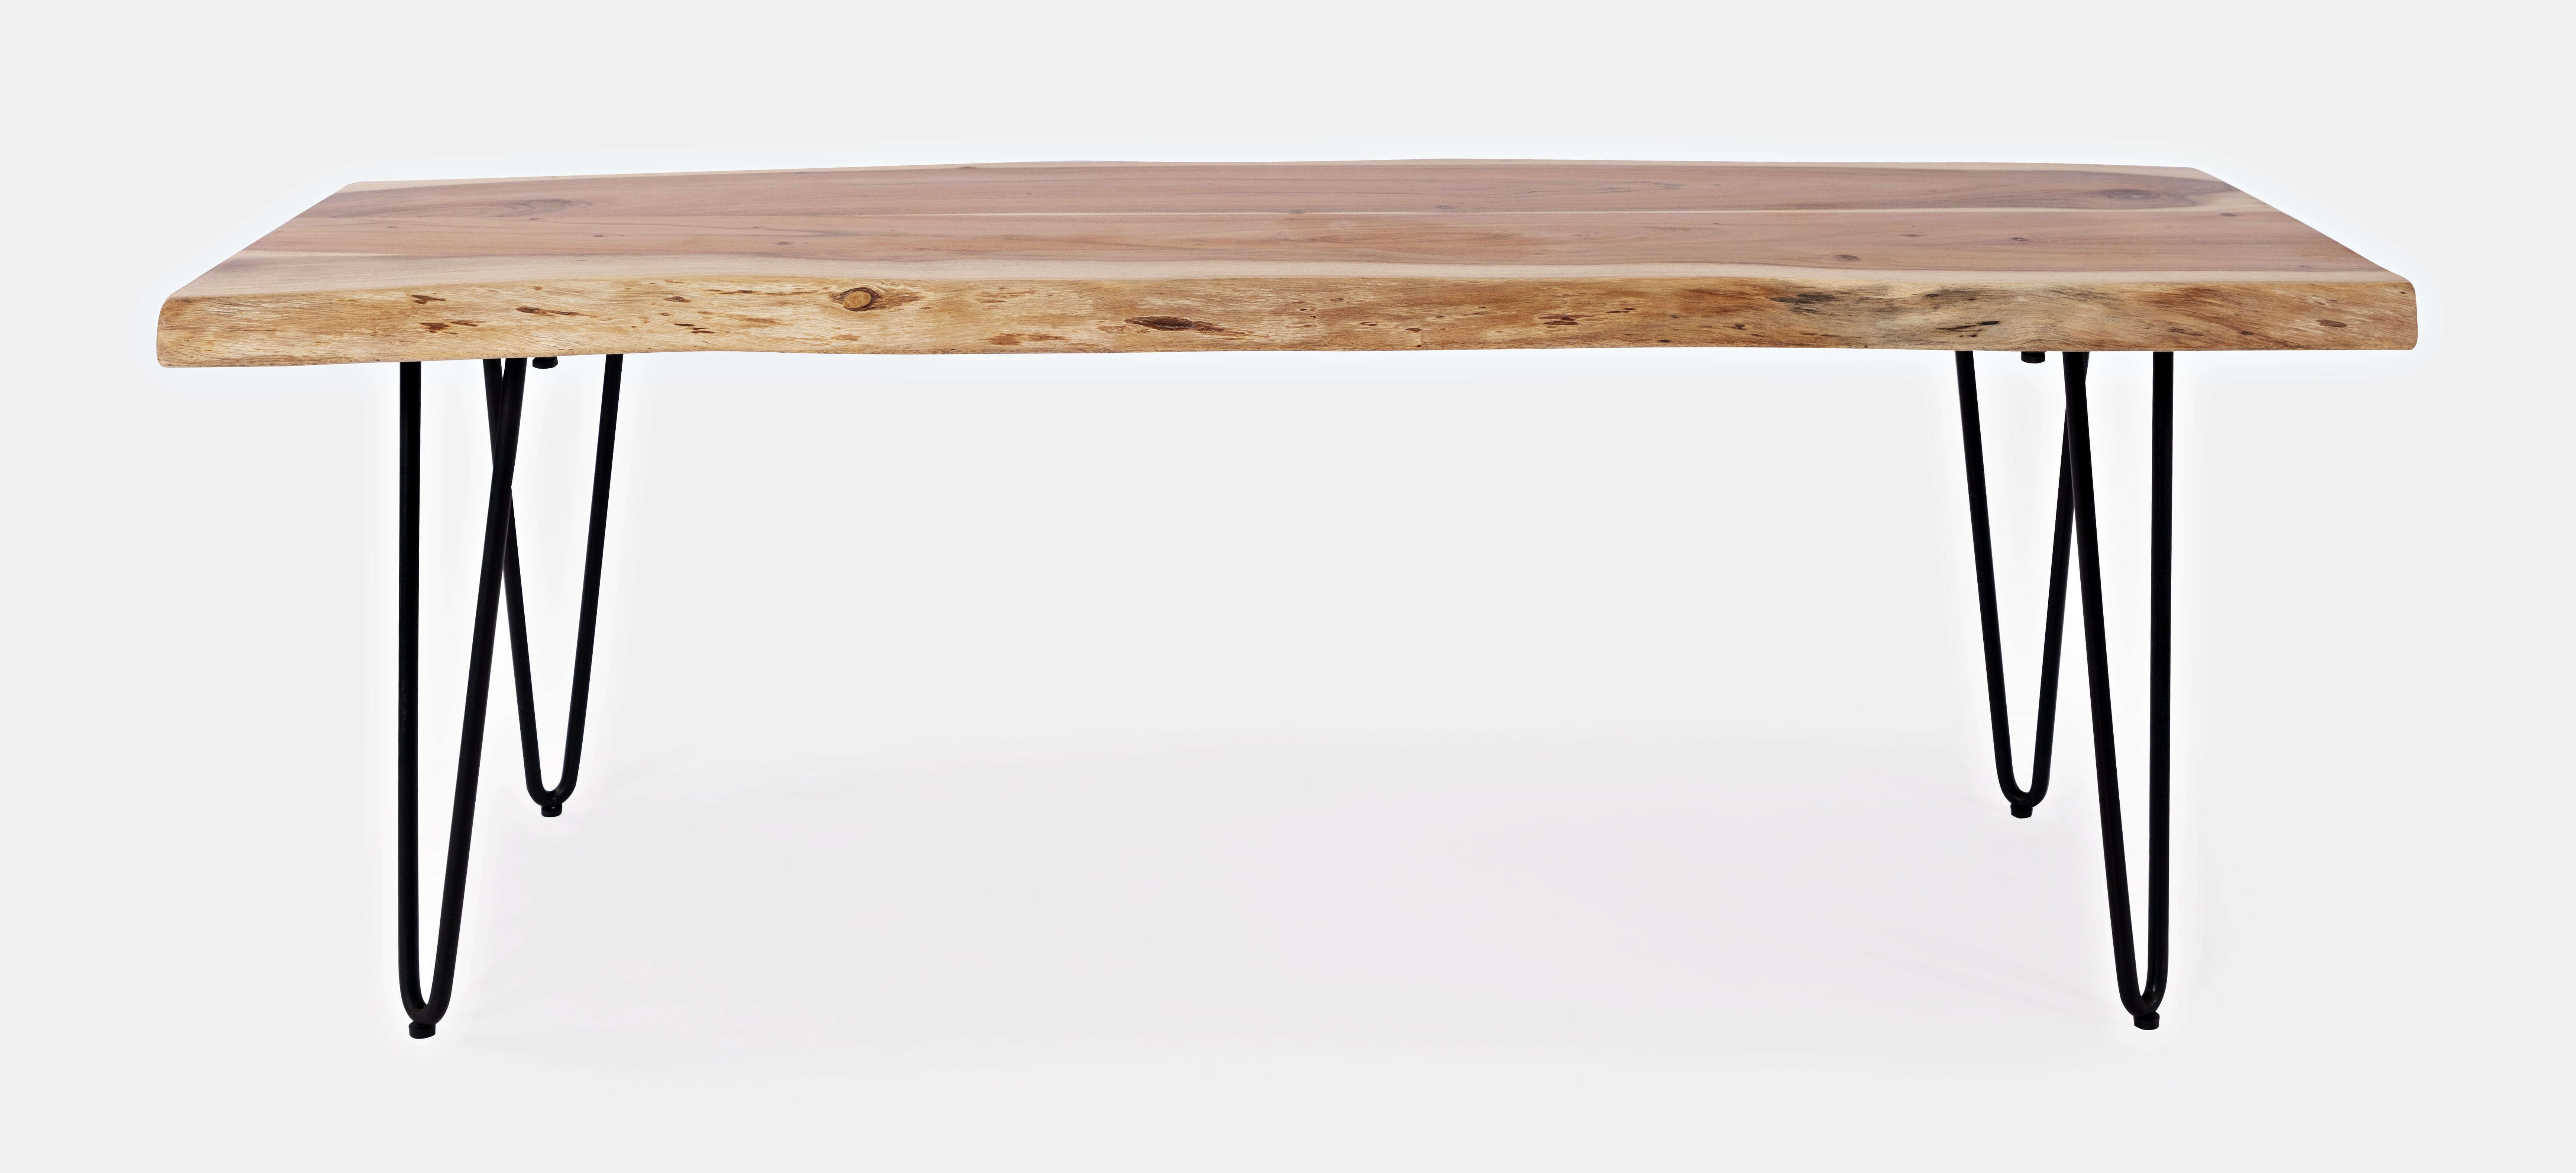 Nature's Edge Natural 60 Inch Dining Table by Jofran Furniture